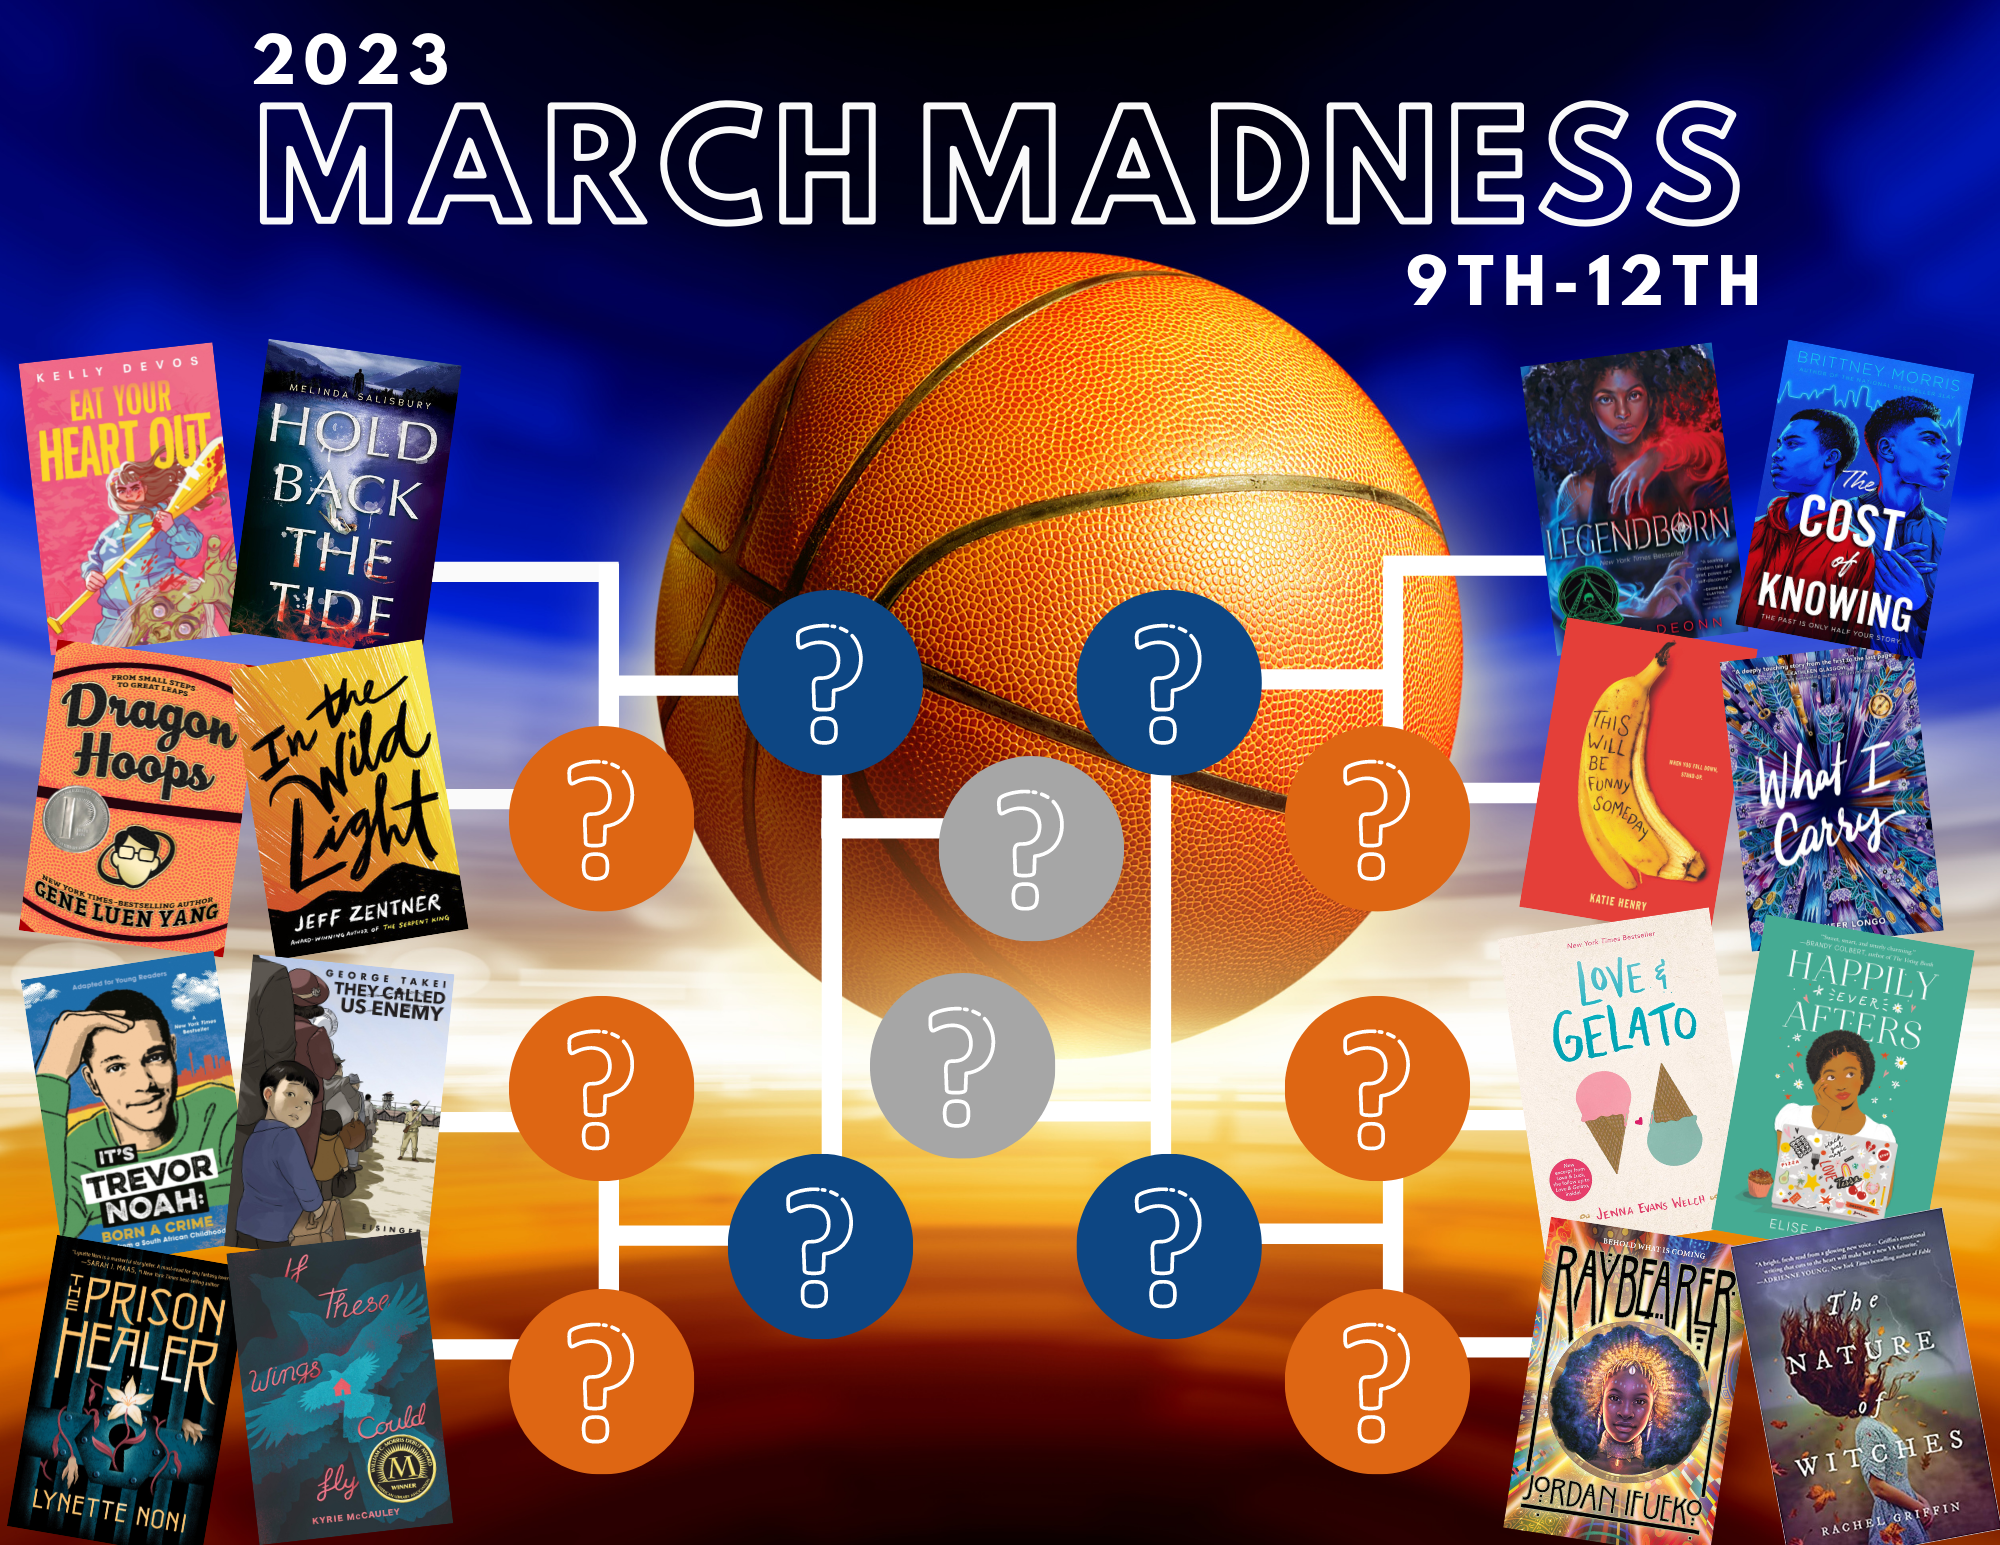 March Madness titles for 2023